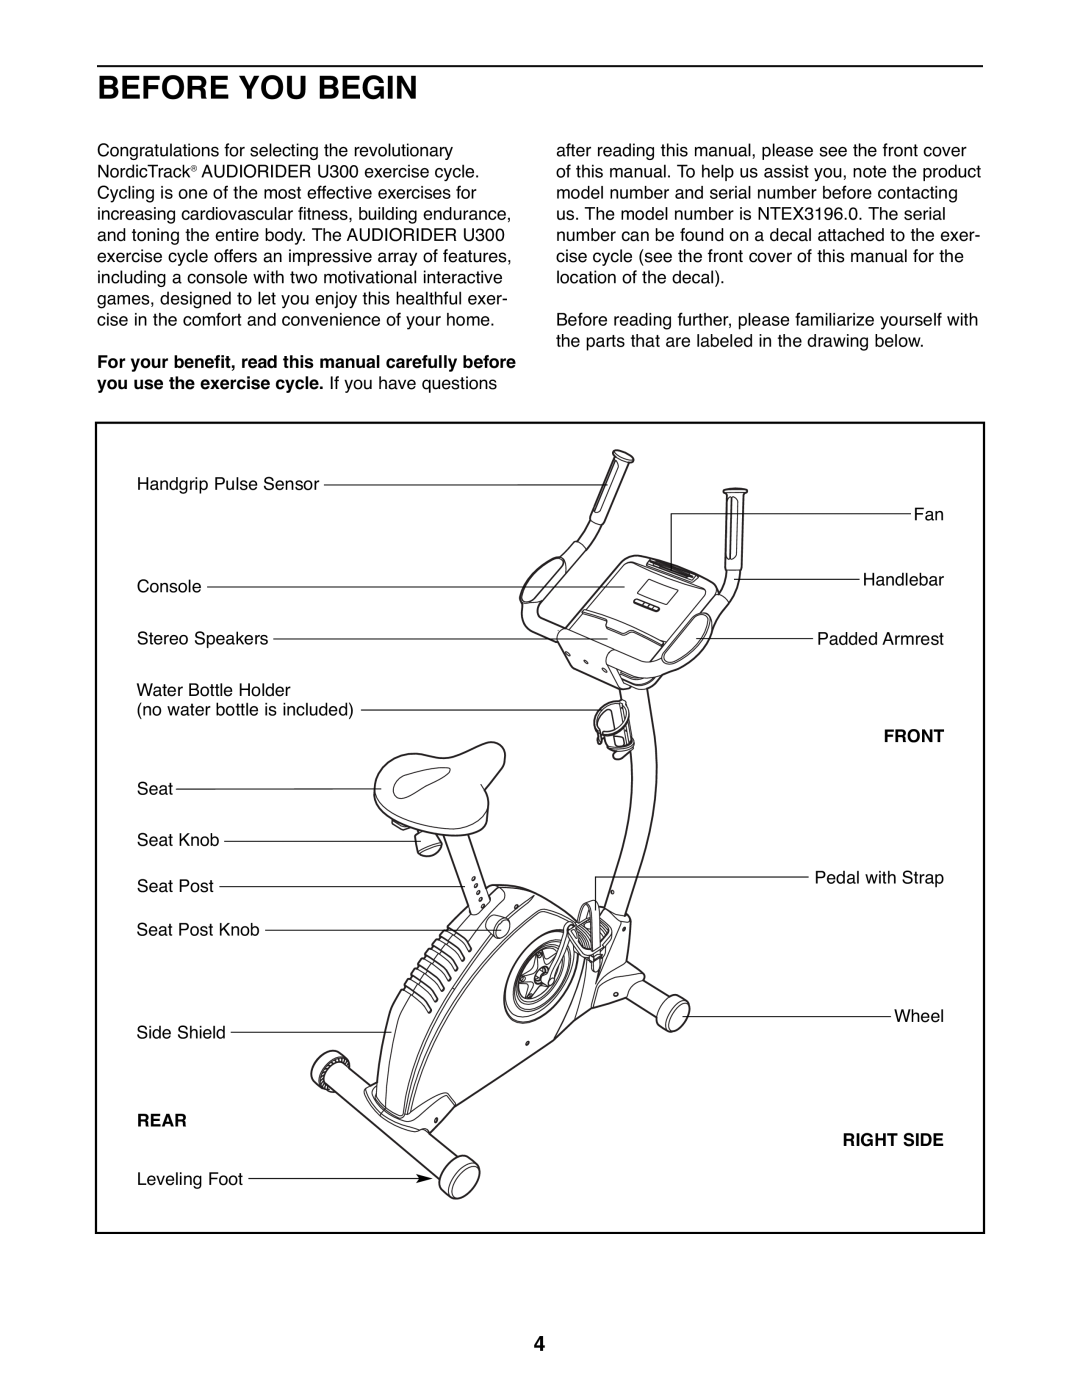 NordicTrack NTEX3196.0 user manual Before You Begin, Front, Rear, Right Side 